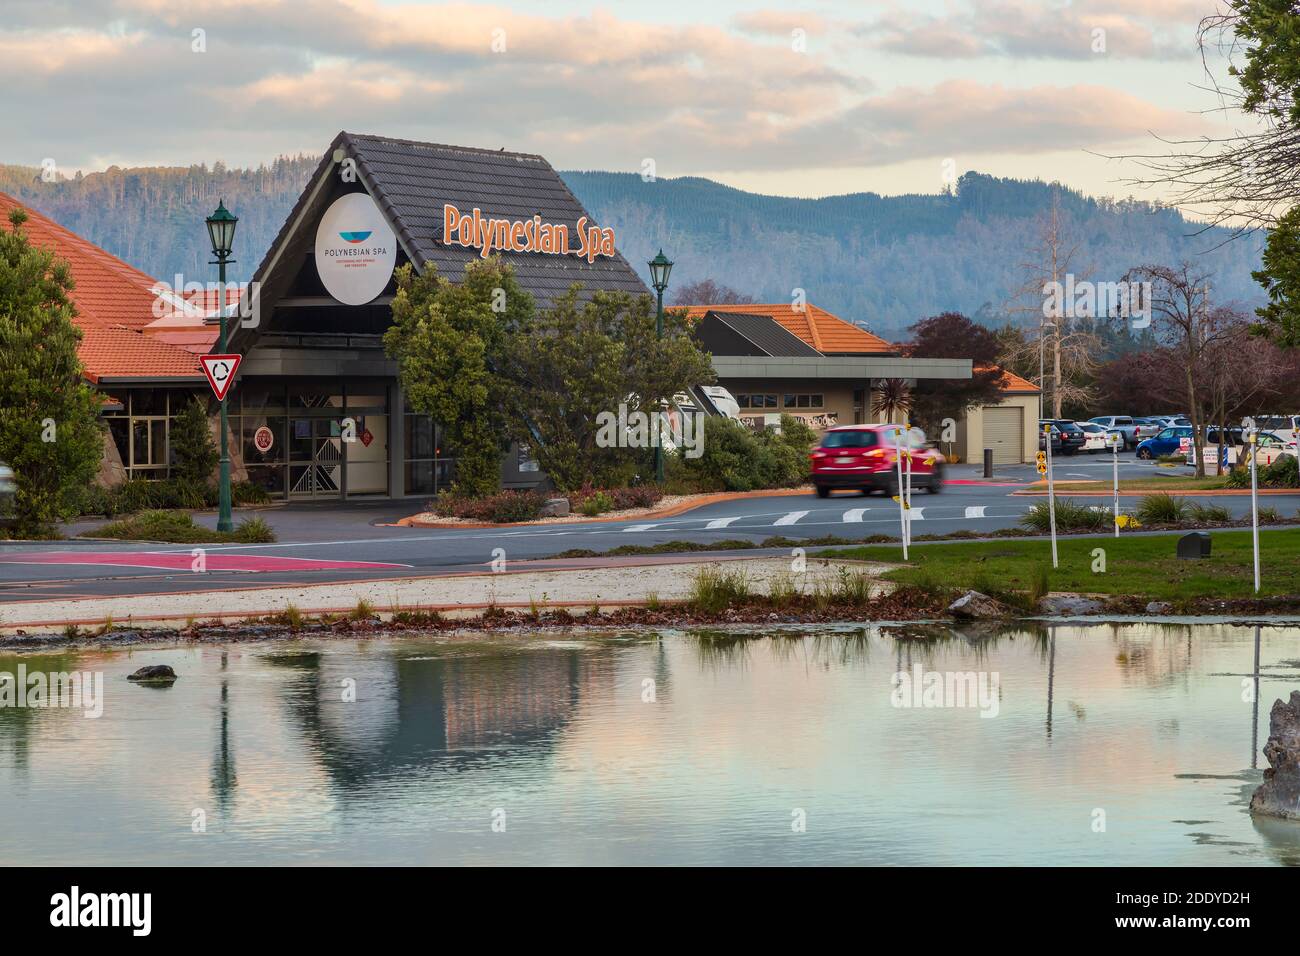 The Polynesian Spa in Government Gardens, Rotorua, New Zealand, a complex of geothermal hot pools for bathing Stock Photo